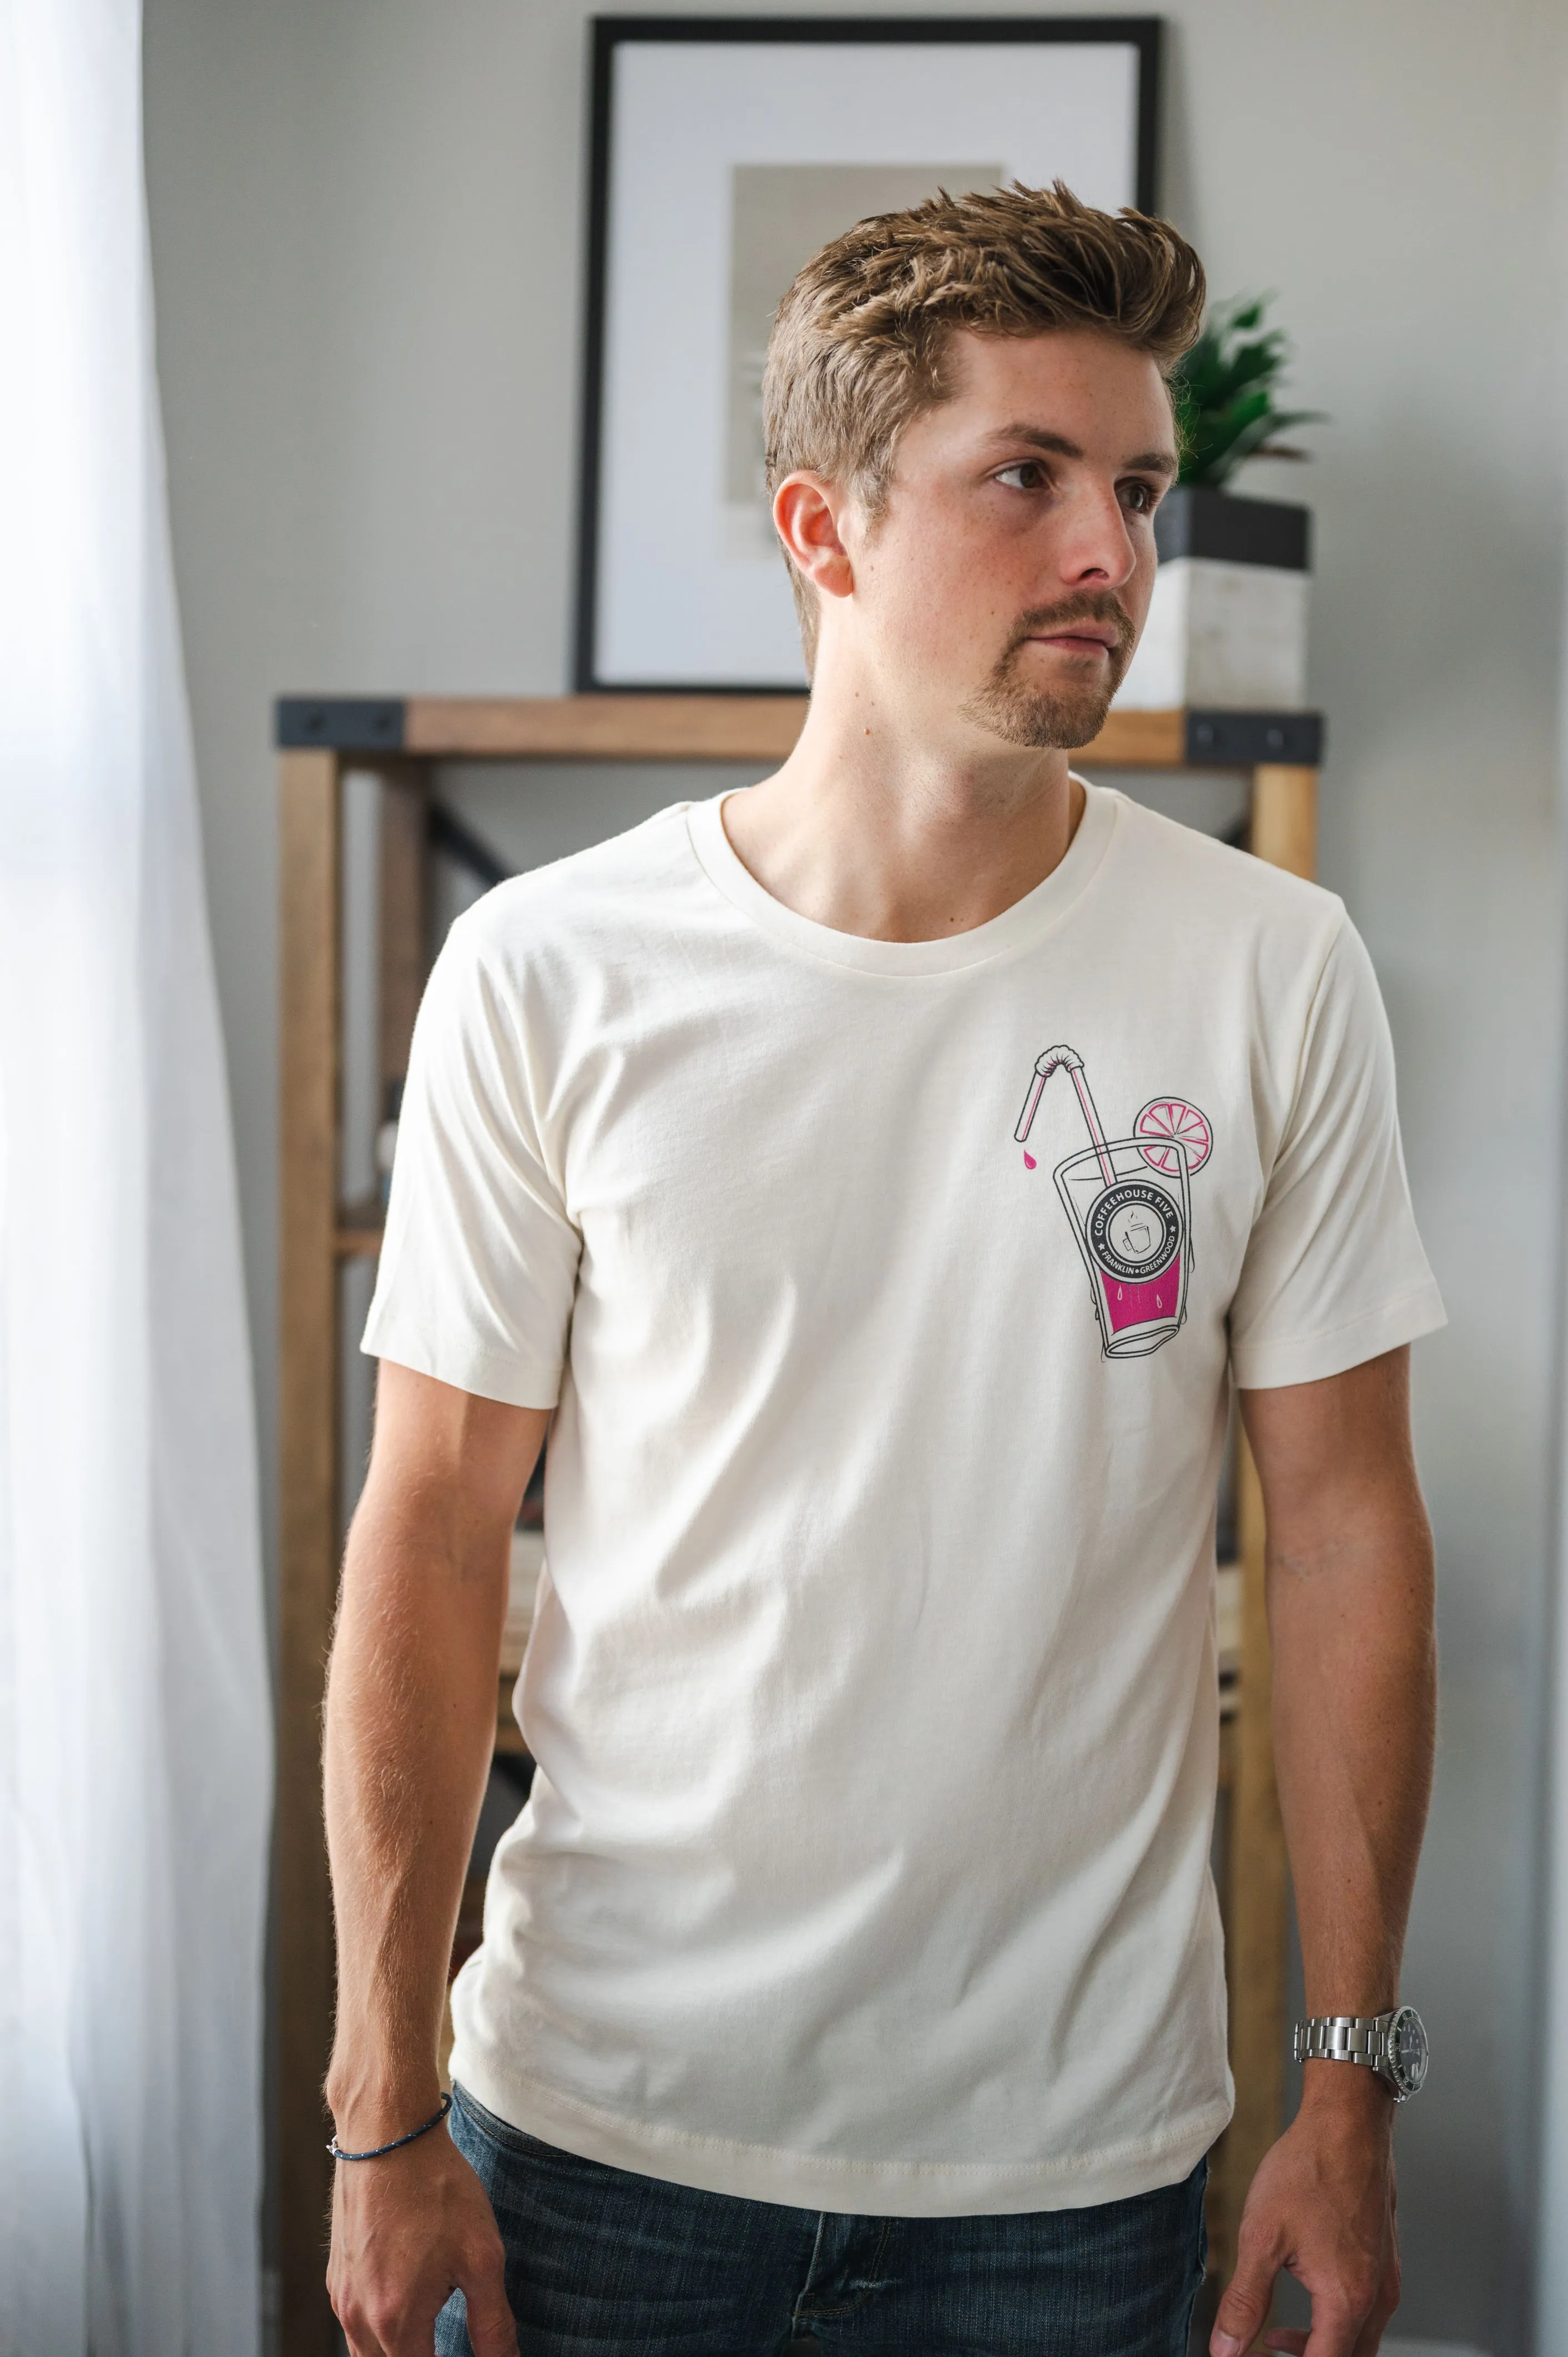 Man in a casual pose wearing a white t-shirt with a pink camera graphic design, standing indoors near a window with soft light.